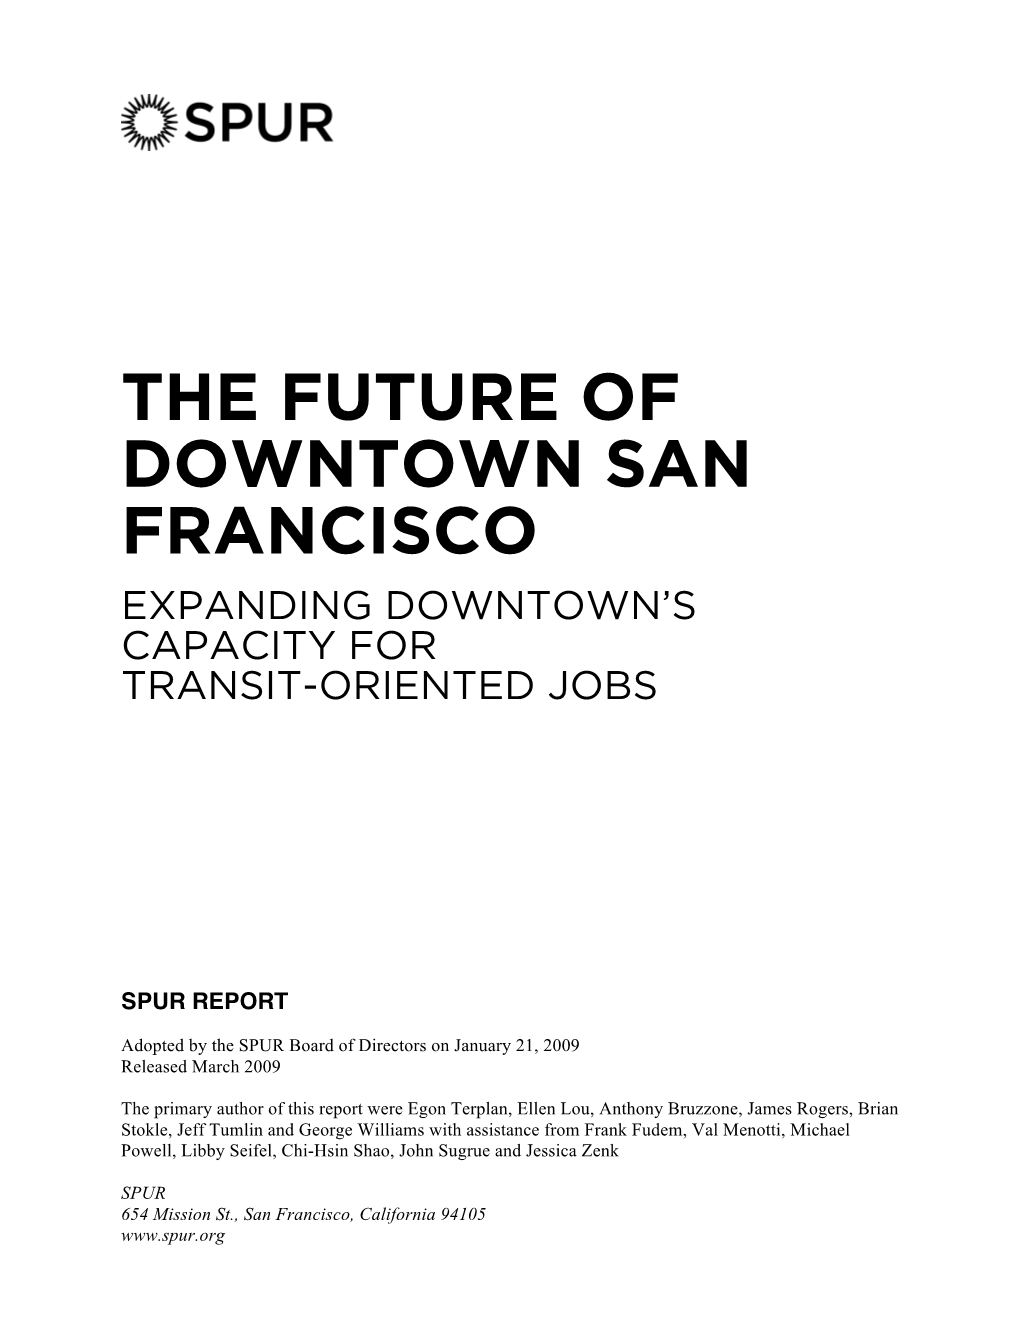 The Future of Downtown San Francisco Expanding Downtown’S Capacity for Transit-Oriented Jobs